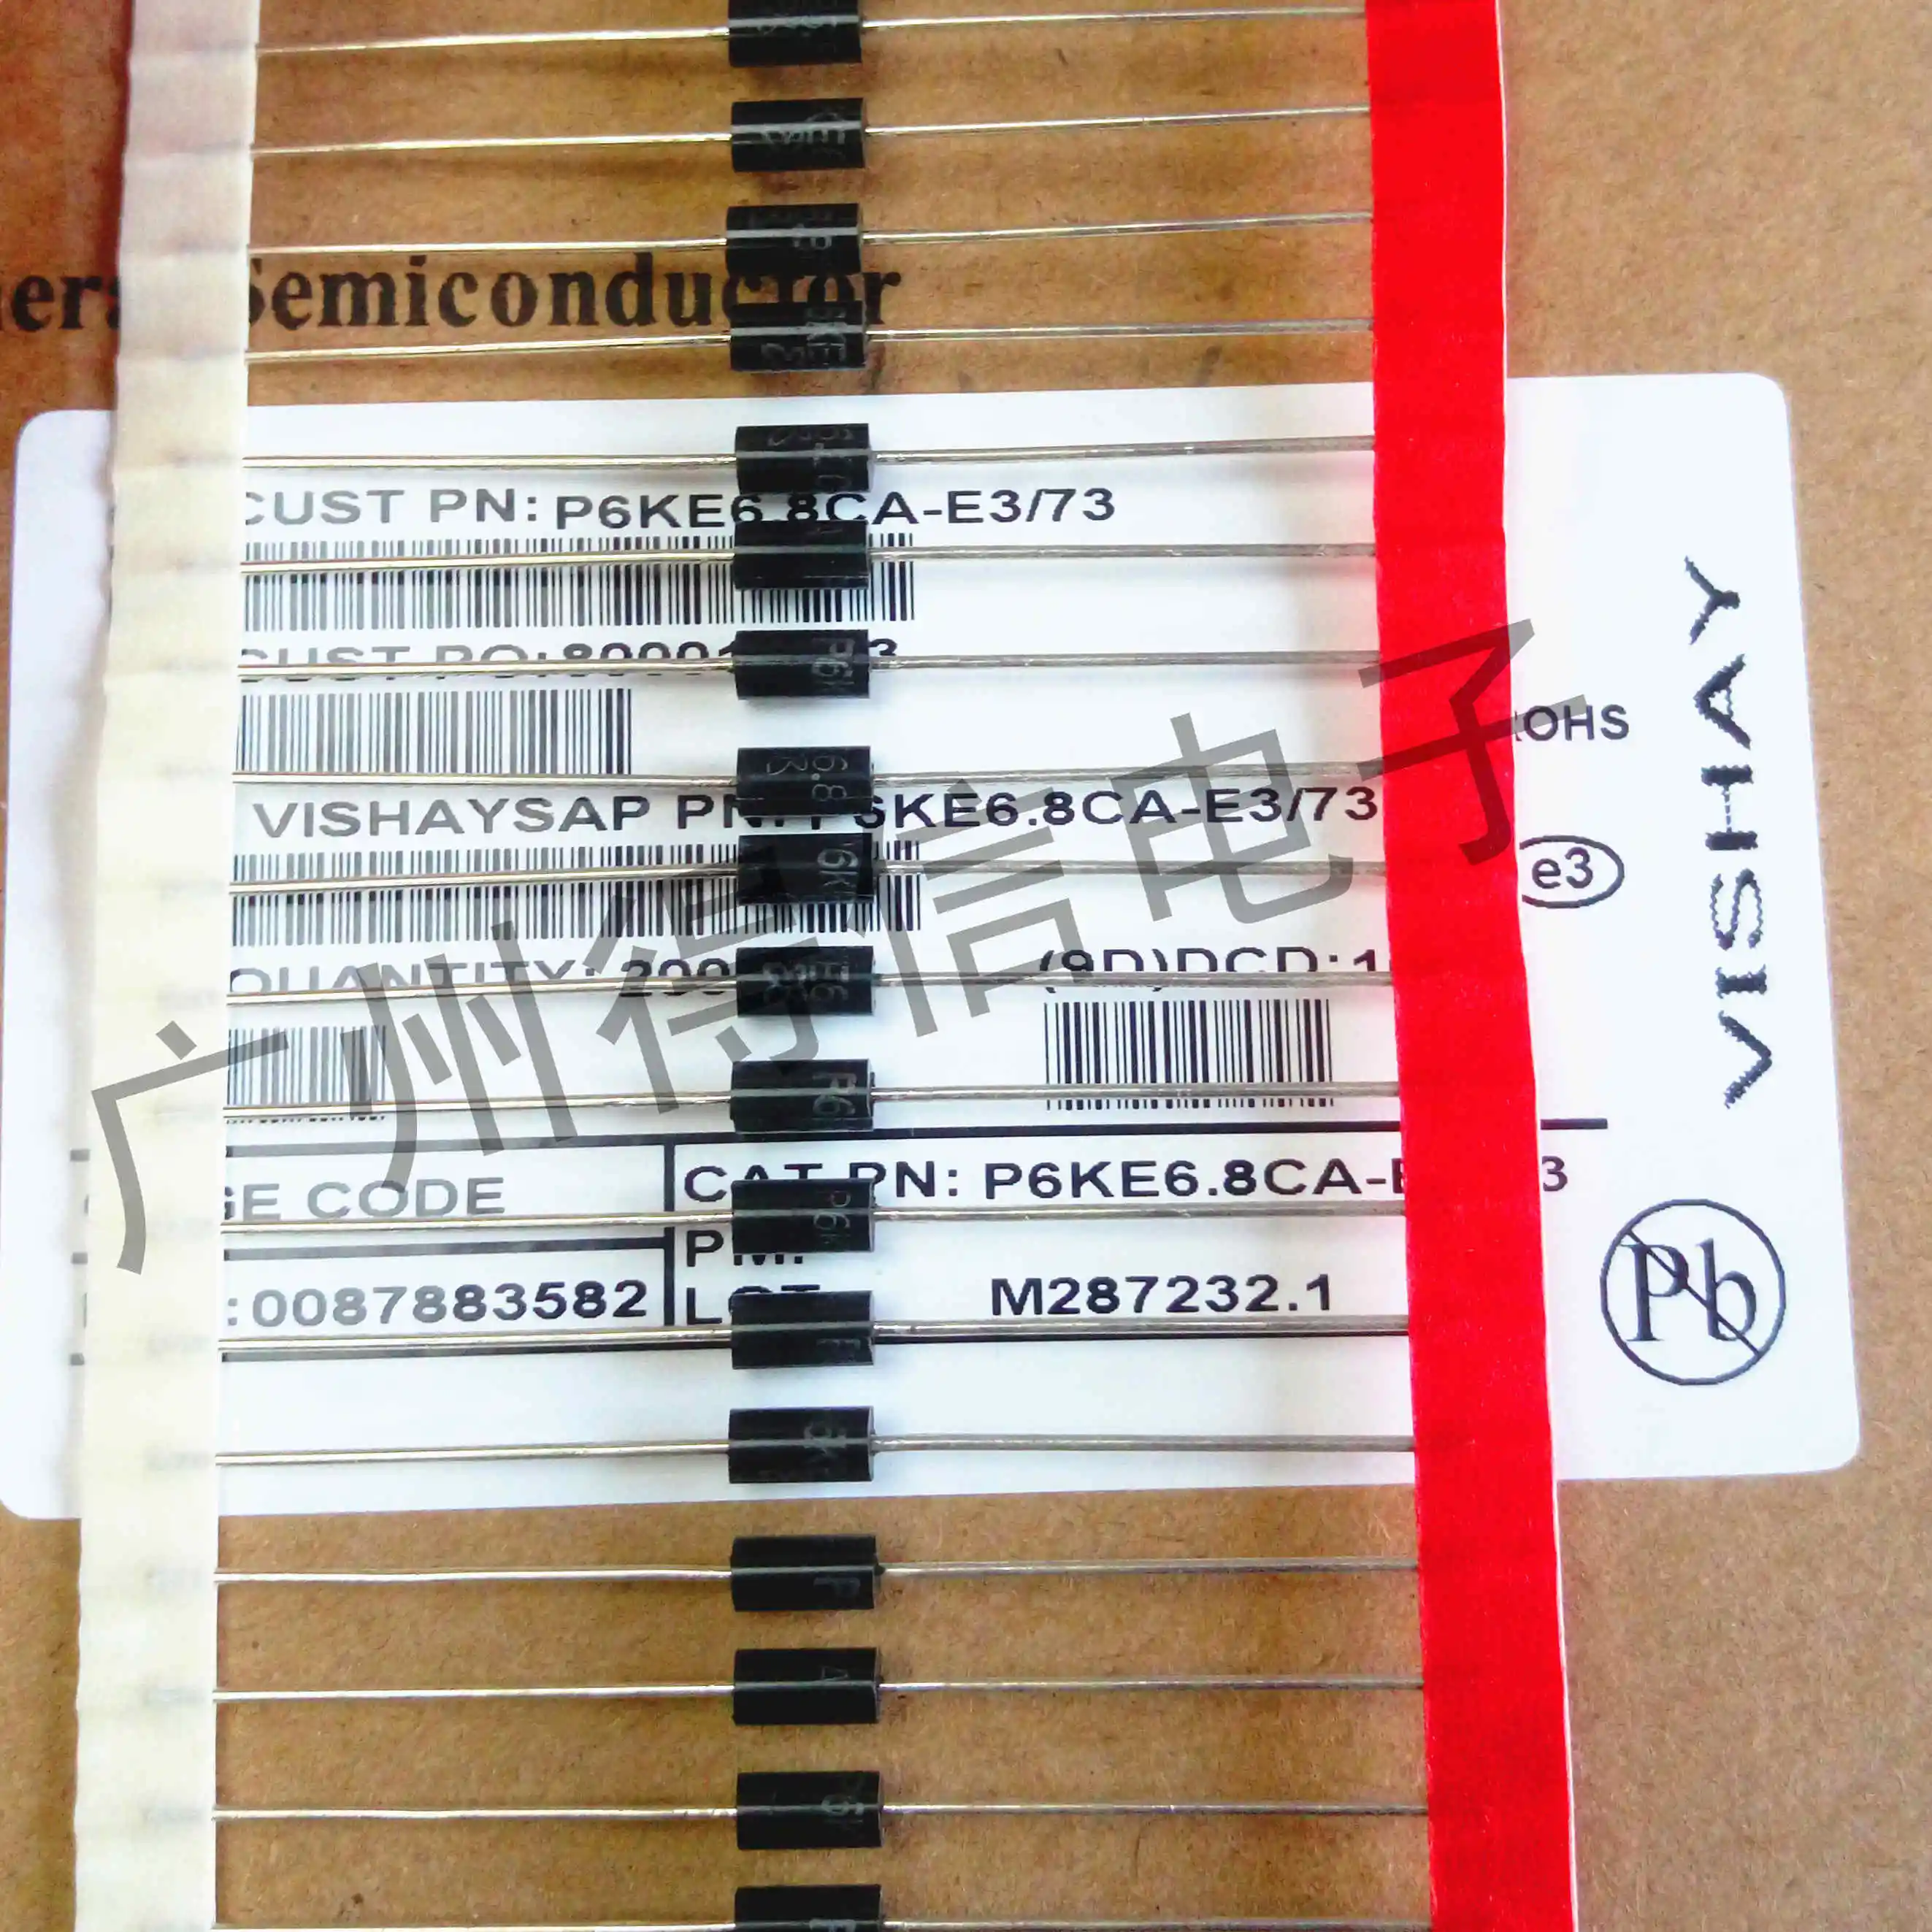 100pcs/lot New VISHAY P6KE DO-15 A unidirectional diode TVS tube plug-in taping transient suppression diode free shipping 100pcs ss12 ss14 ss16 ss18 ss110 ss115 ss120 schottky smd diode sma smd do 214ac free shipping electronics